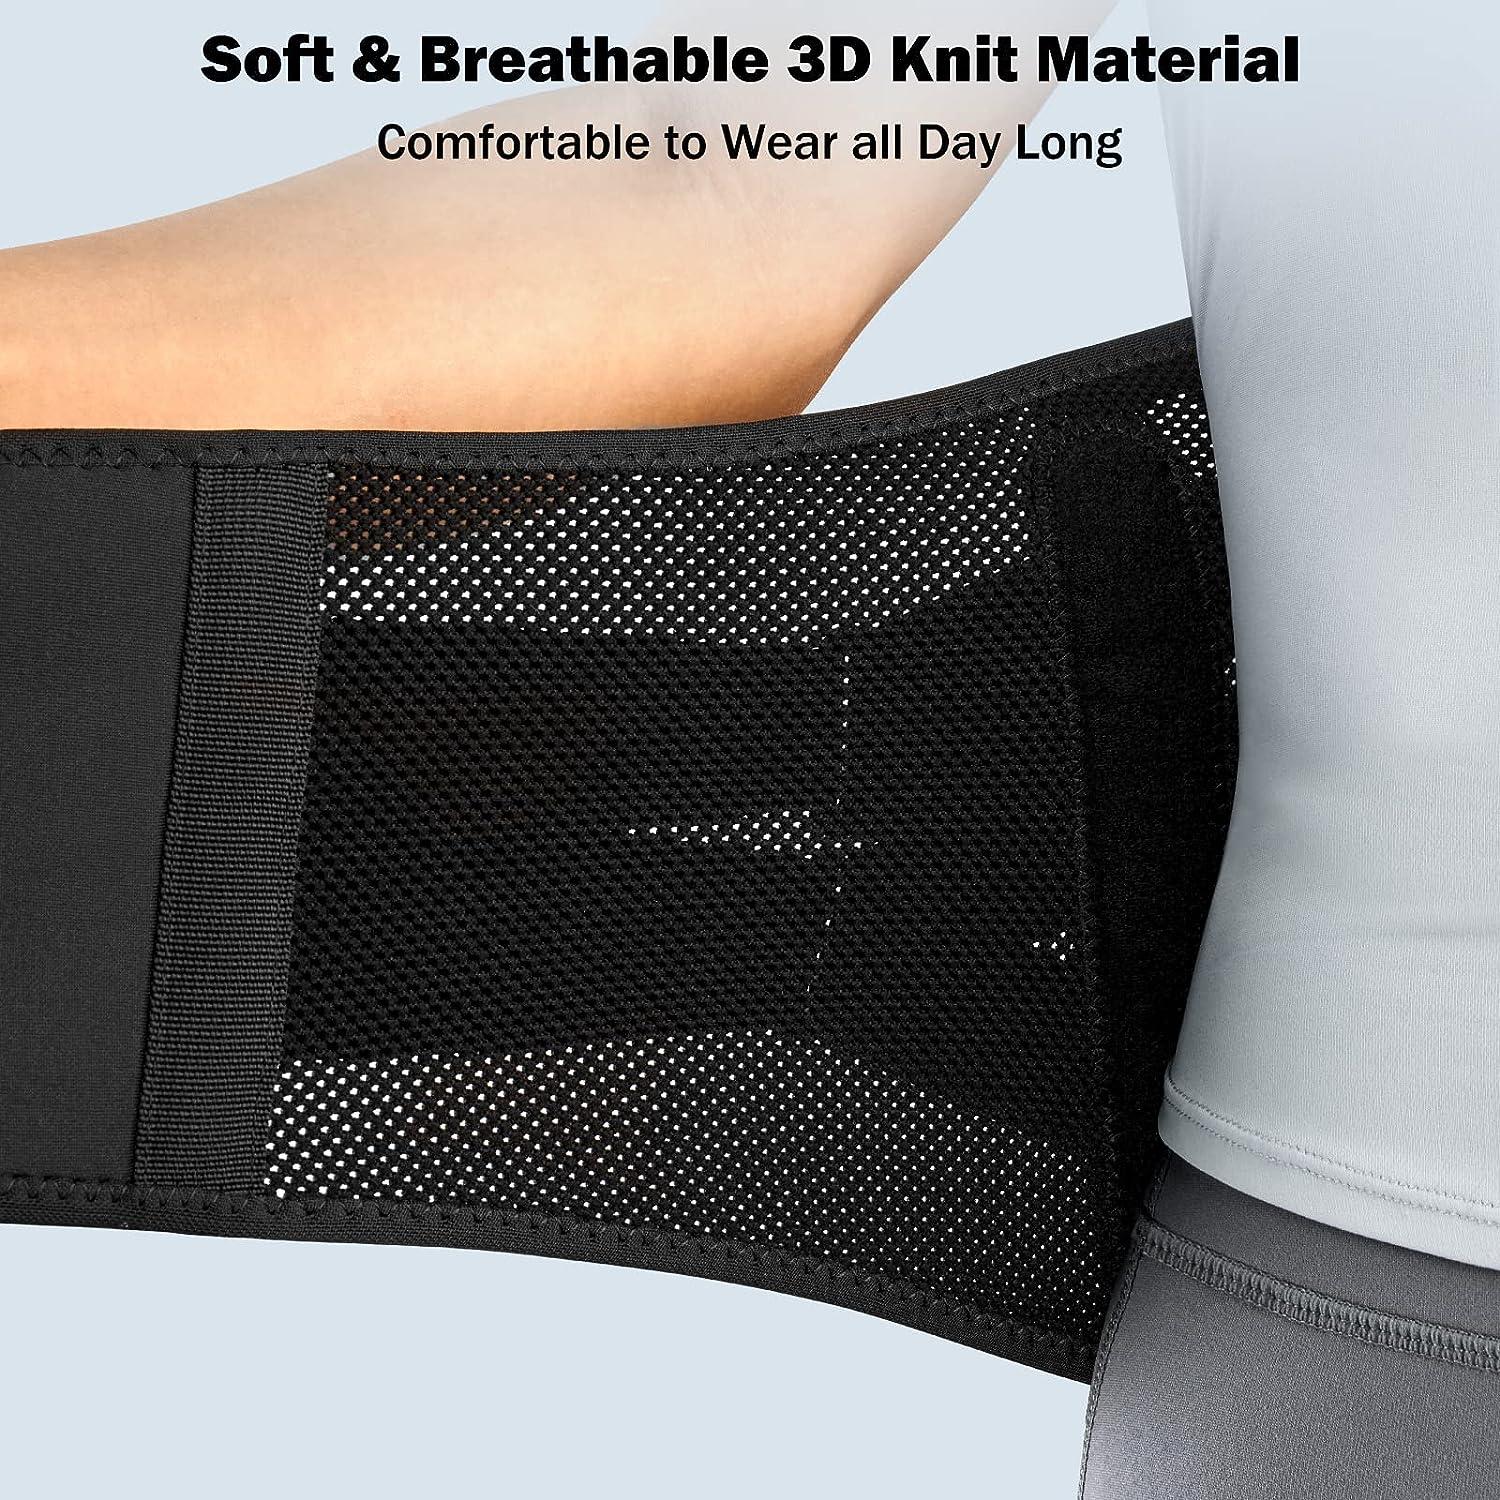 FREETOO Back Brace for Lower Back Pain Relief with Pulley System